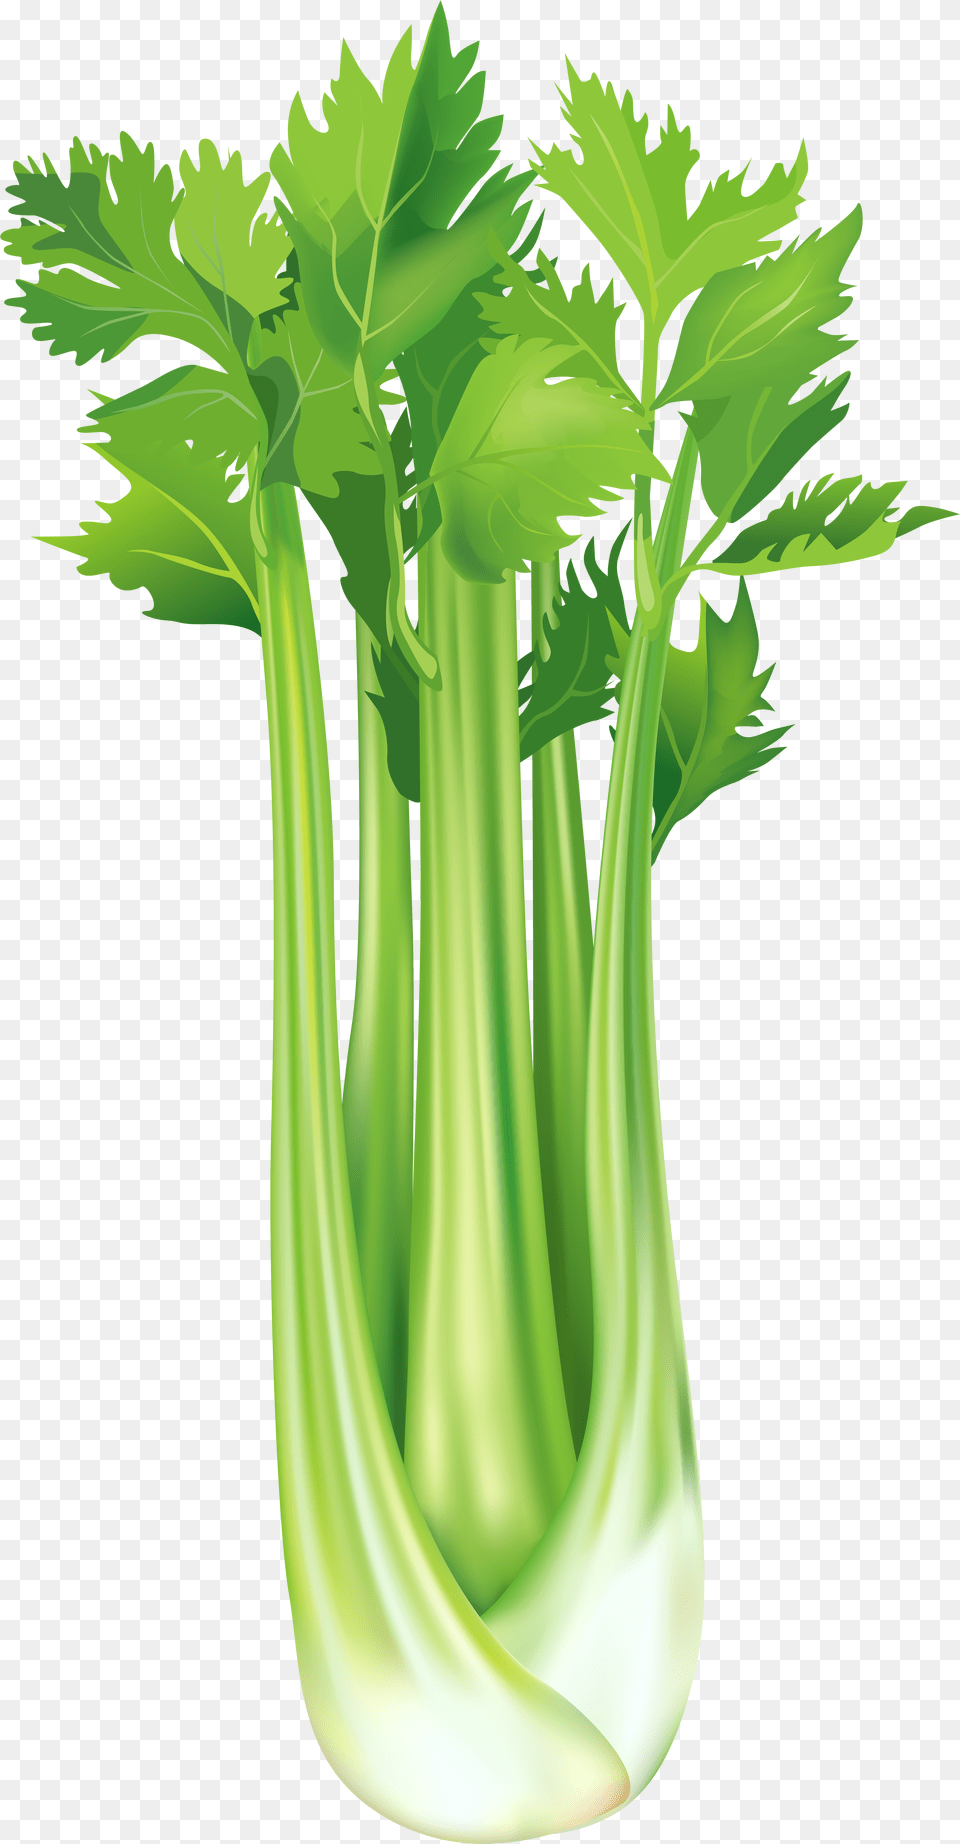 Green Onion And Celery Free Png Download